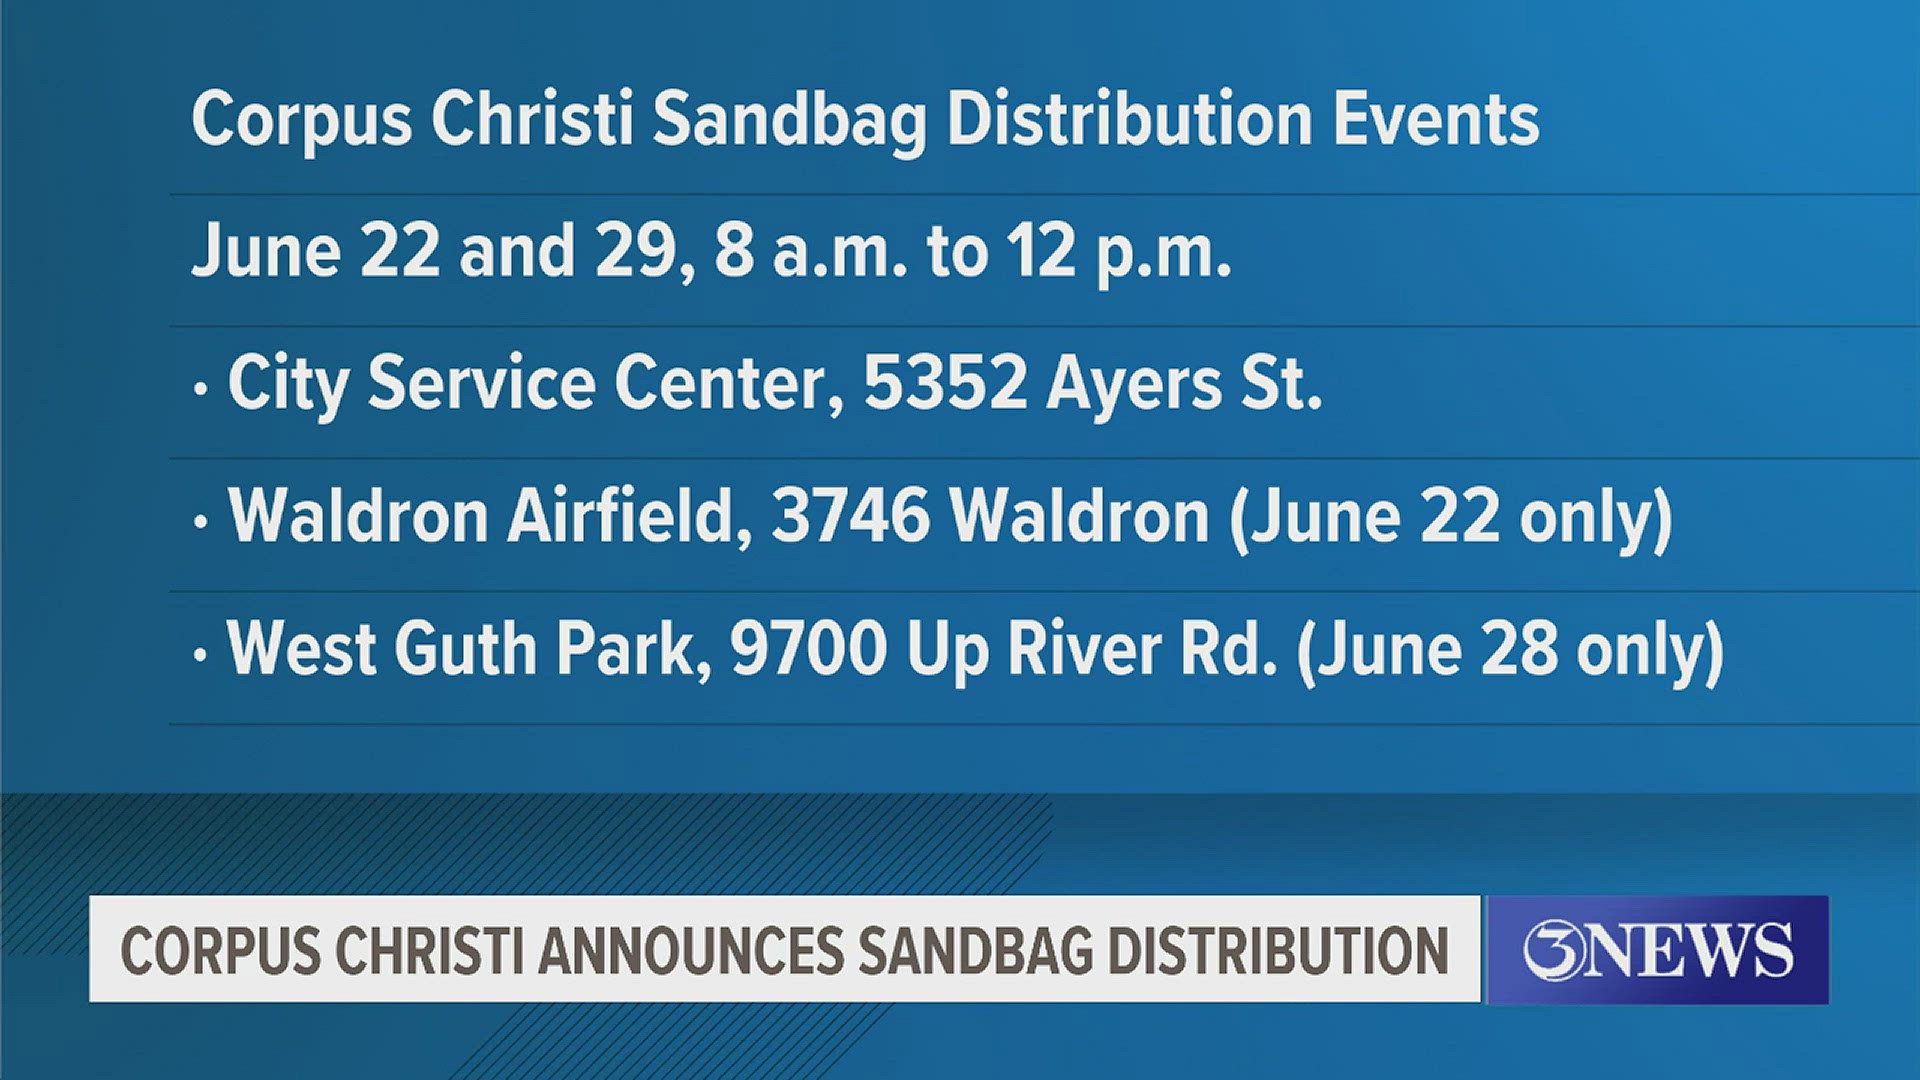 Residents can pick up sandbags from Waldron Airfield on June 22, and West Guth Park on June 29. They will also be available at the City Service Center on both days.